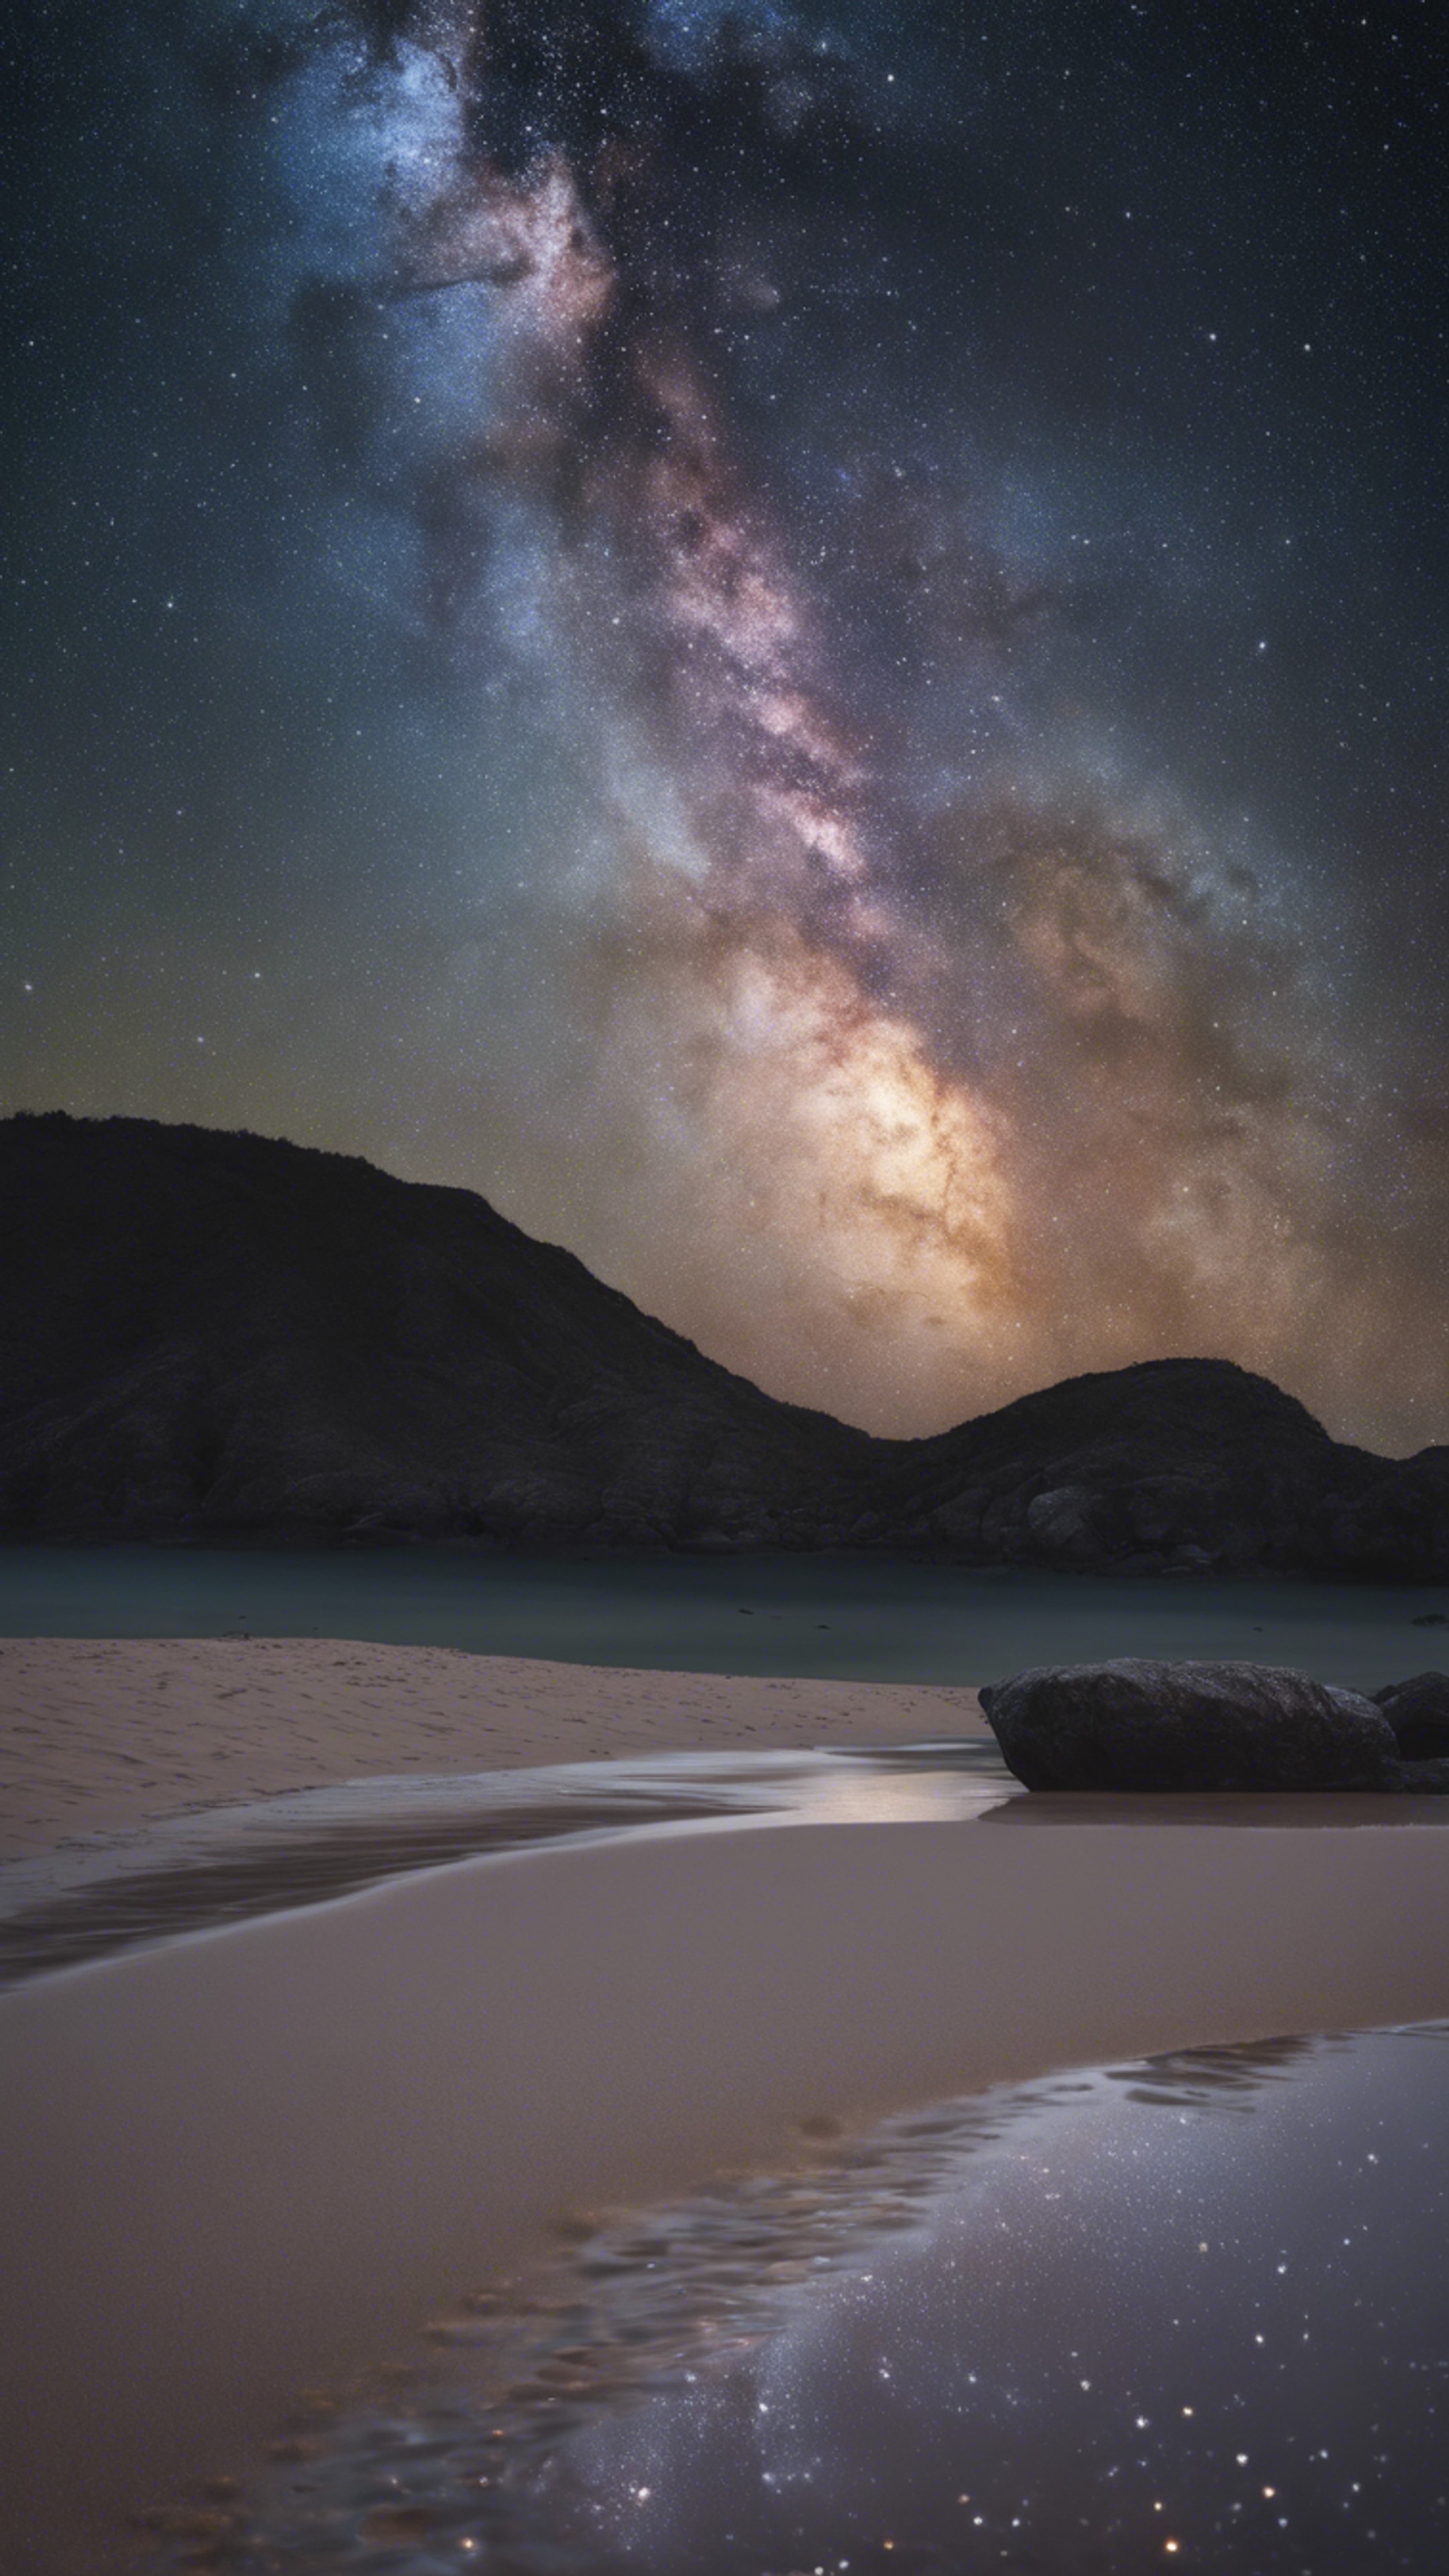 View of the Milky Way Galaxy across a dark starry night sky as seen from a deserted beach. Behang[ccd5588141b94e439f84]